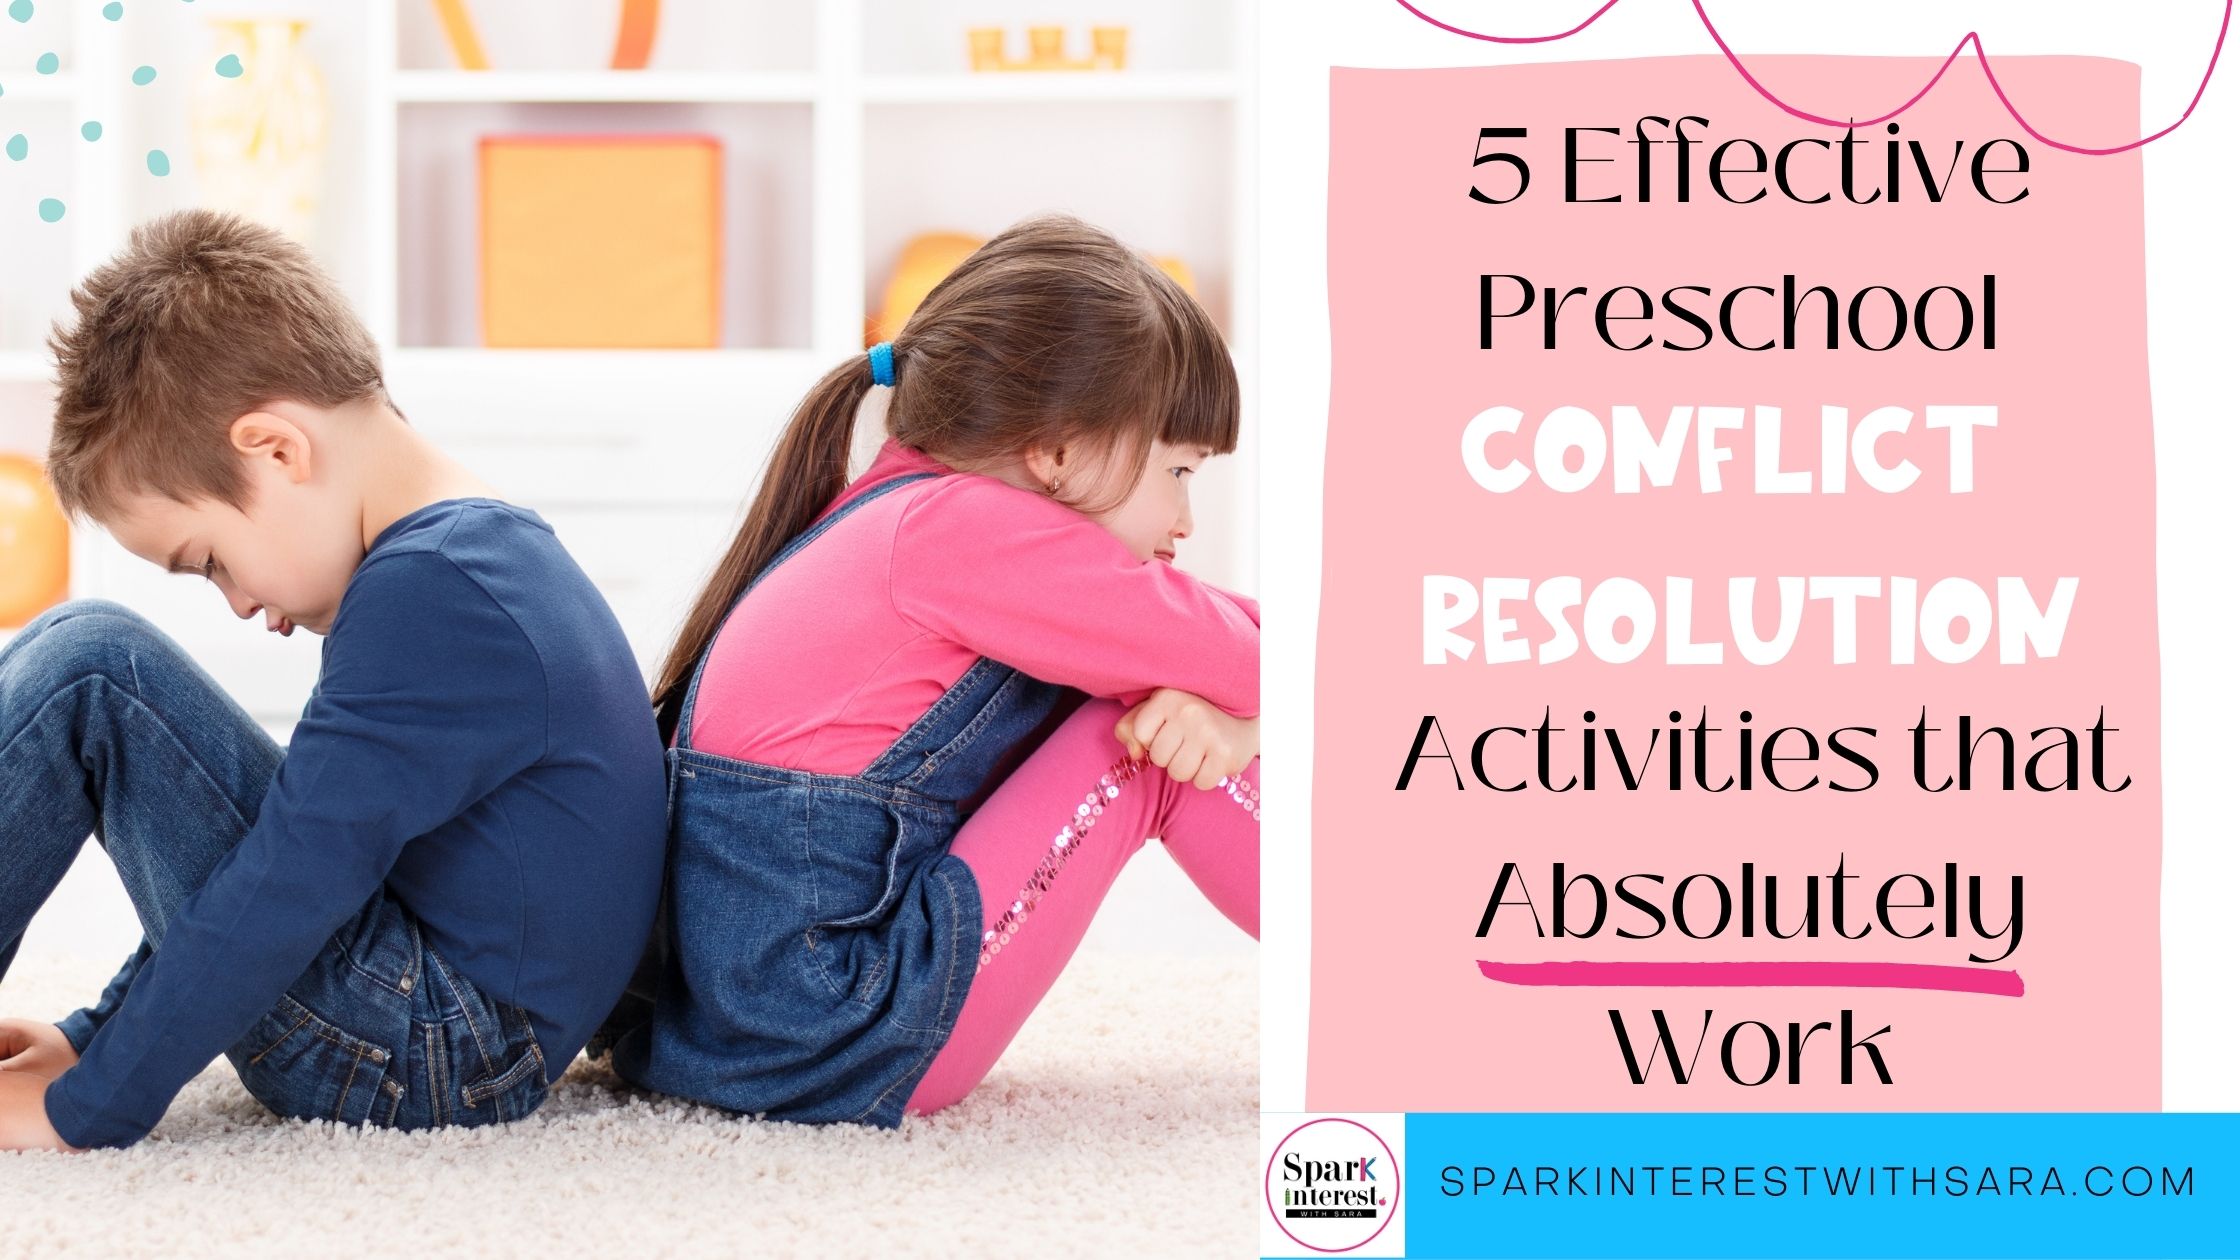 Photo of a blog post discusses ways to teach preschoolers conflict resolution skills.